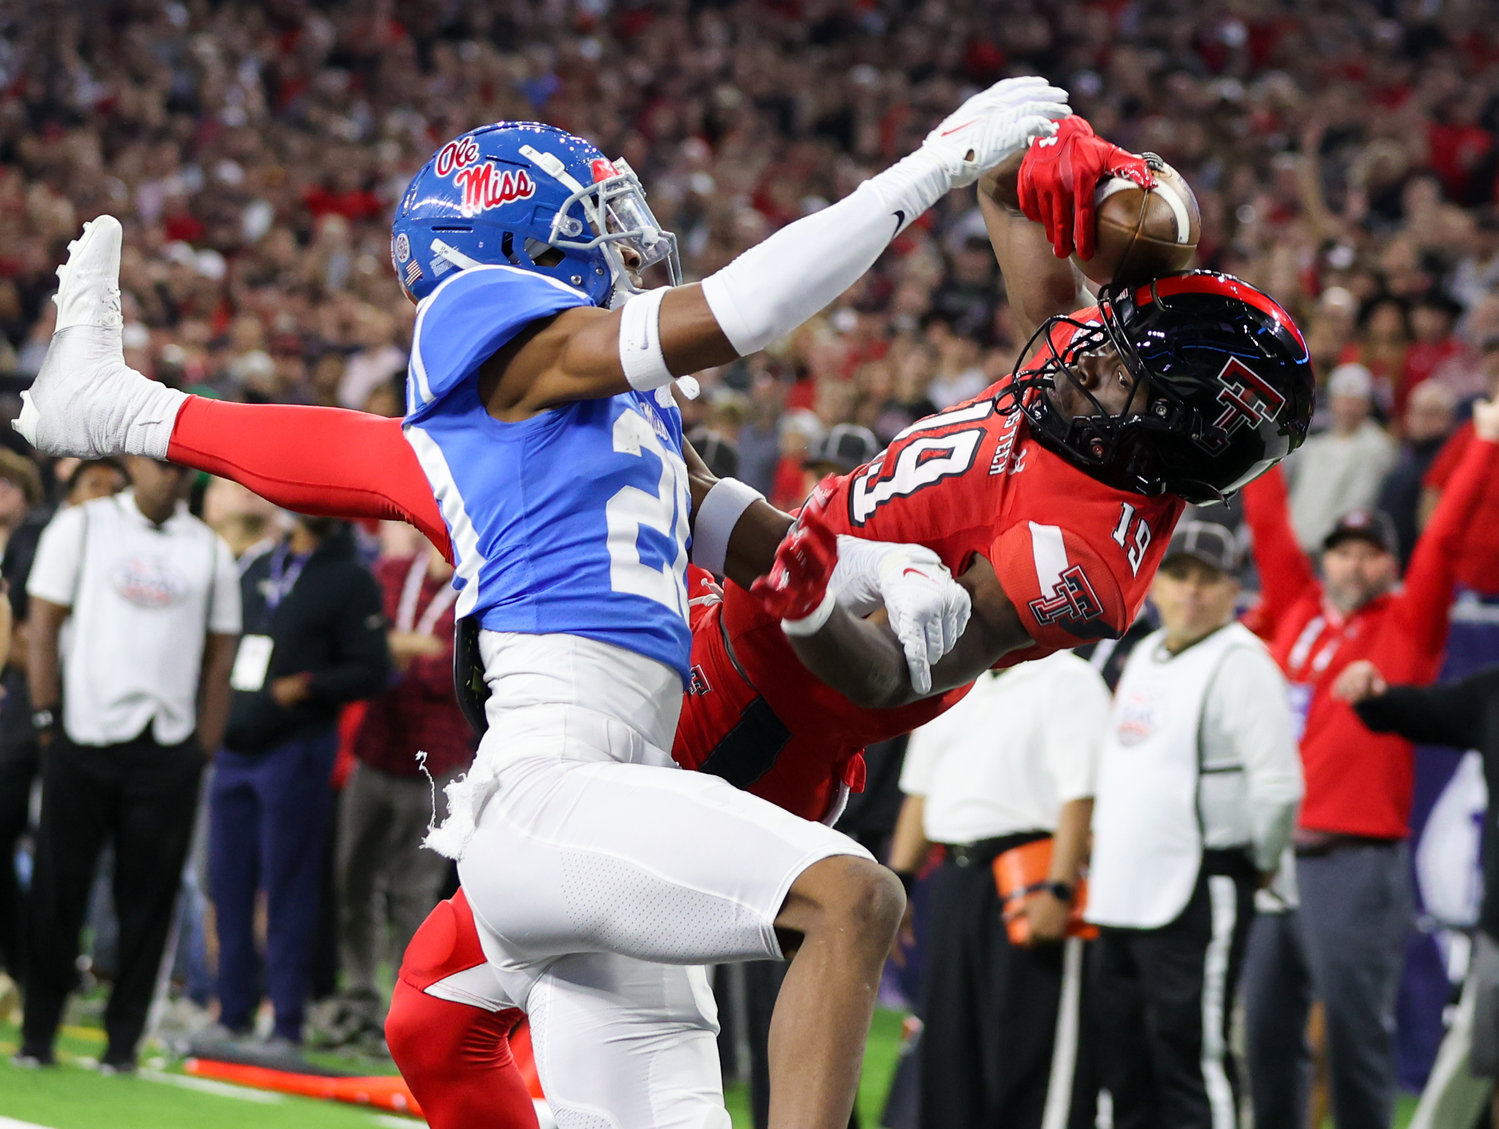 Mississippi cornerback Davison Igbinosun (20) dislodges a would-be touchdown pass intended for Mississippi wide receiver Dayton Wade (19) during the TaxAct Texas Bowl on Dec. 28, 2022 in Houston.